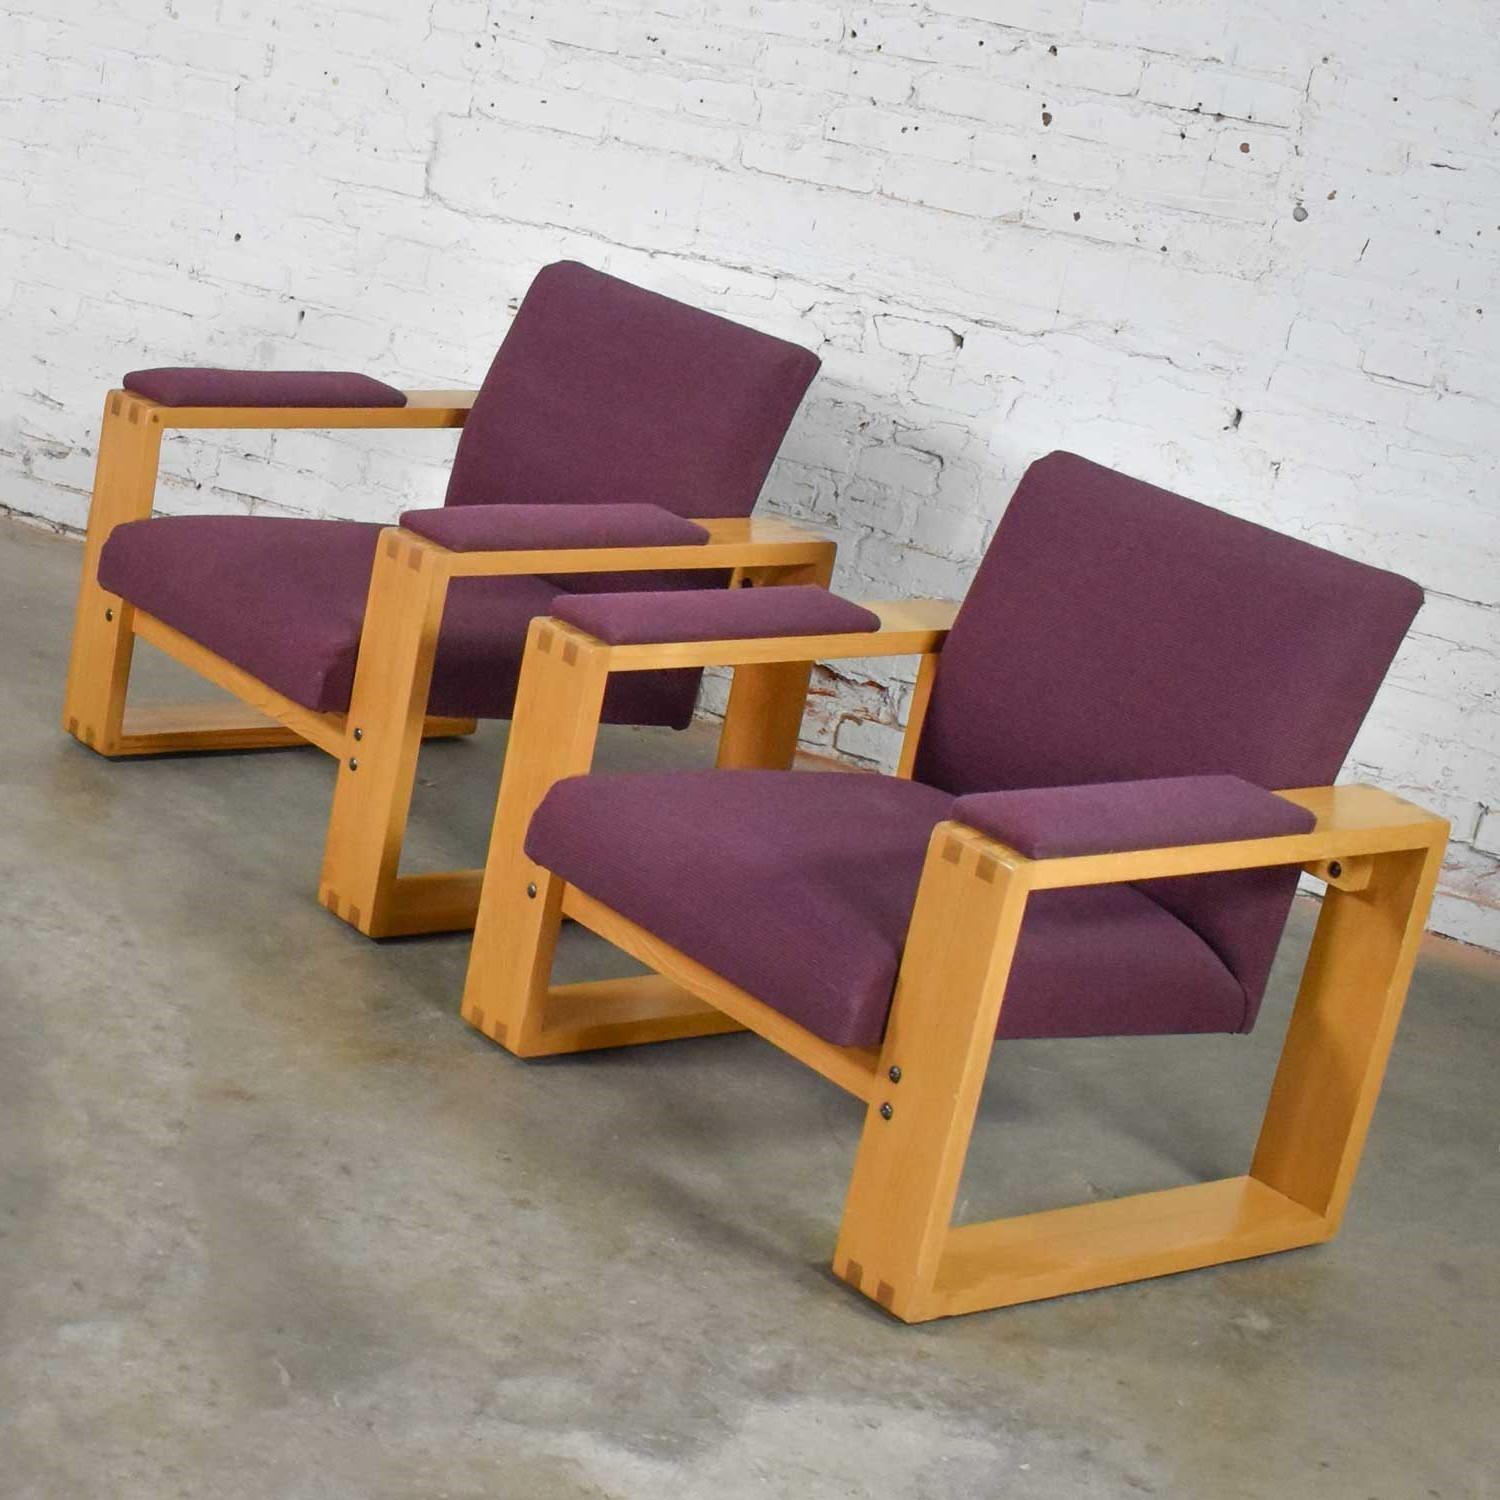 Handsome pair of modern oak open frame club chairs with a floating seat upholstered in a beautiful aubergine fabric. They are both in wonderful vintage condition. But they are vintage and in their original fabric so are not perfect. Please see